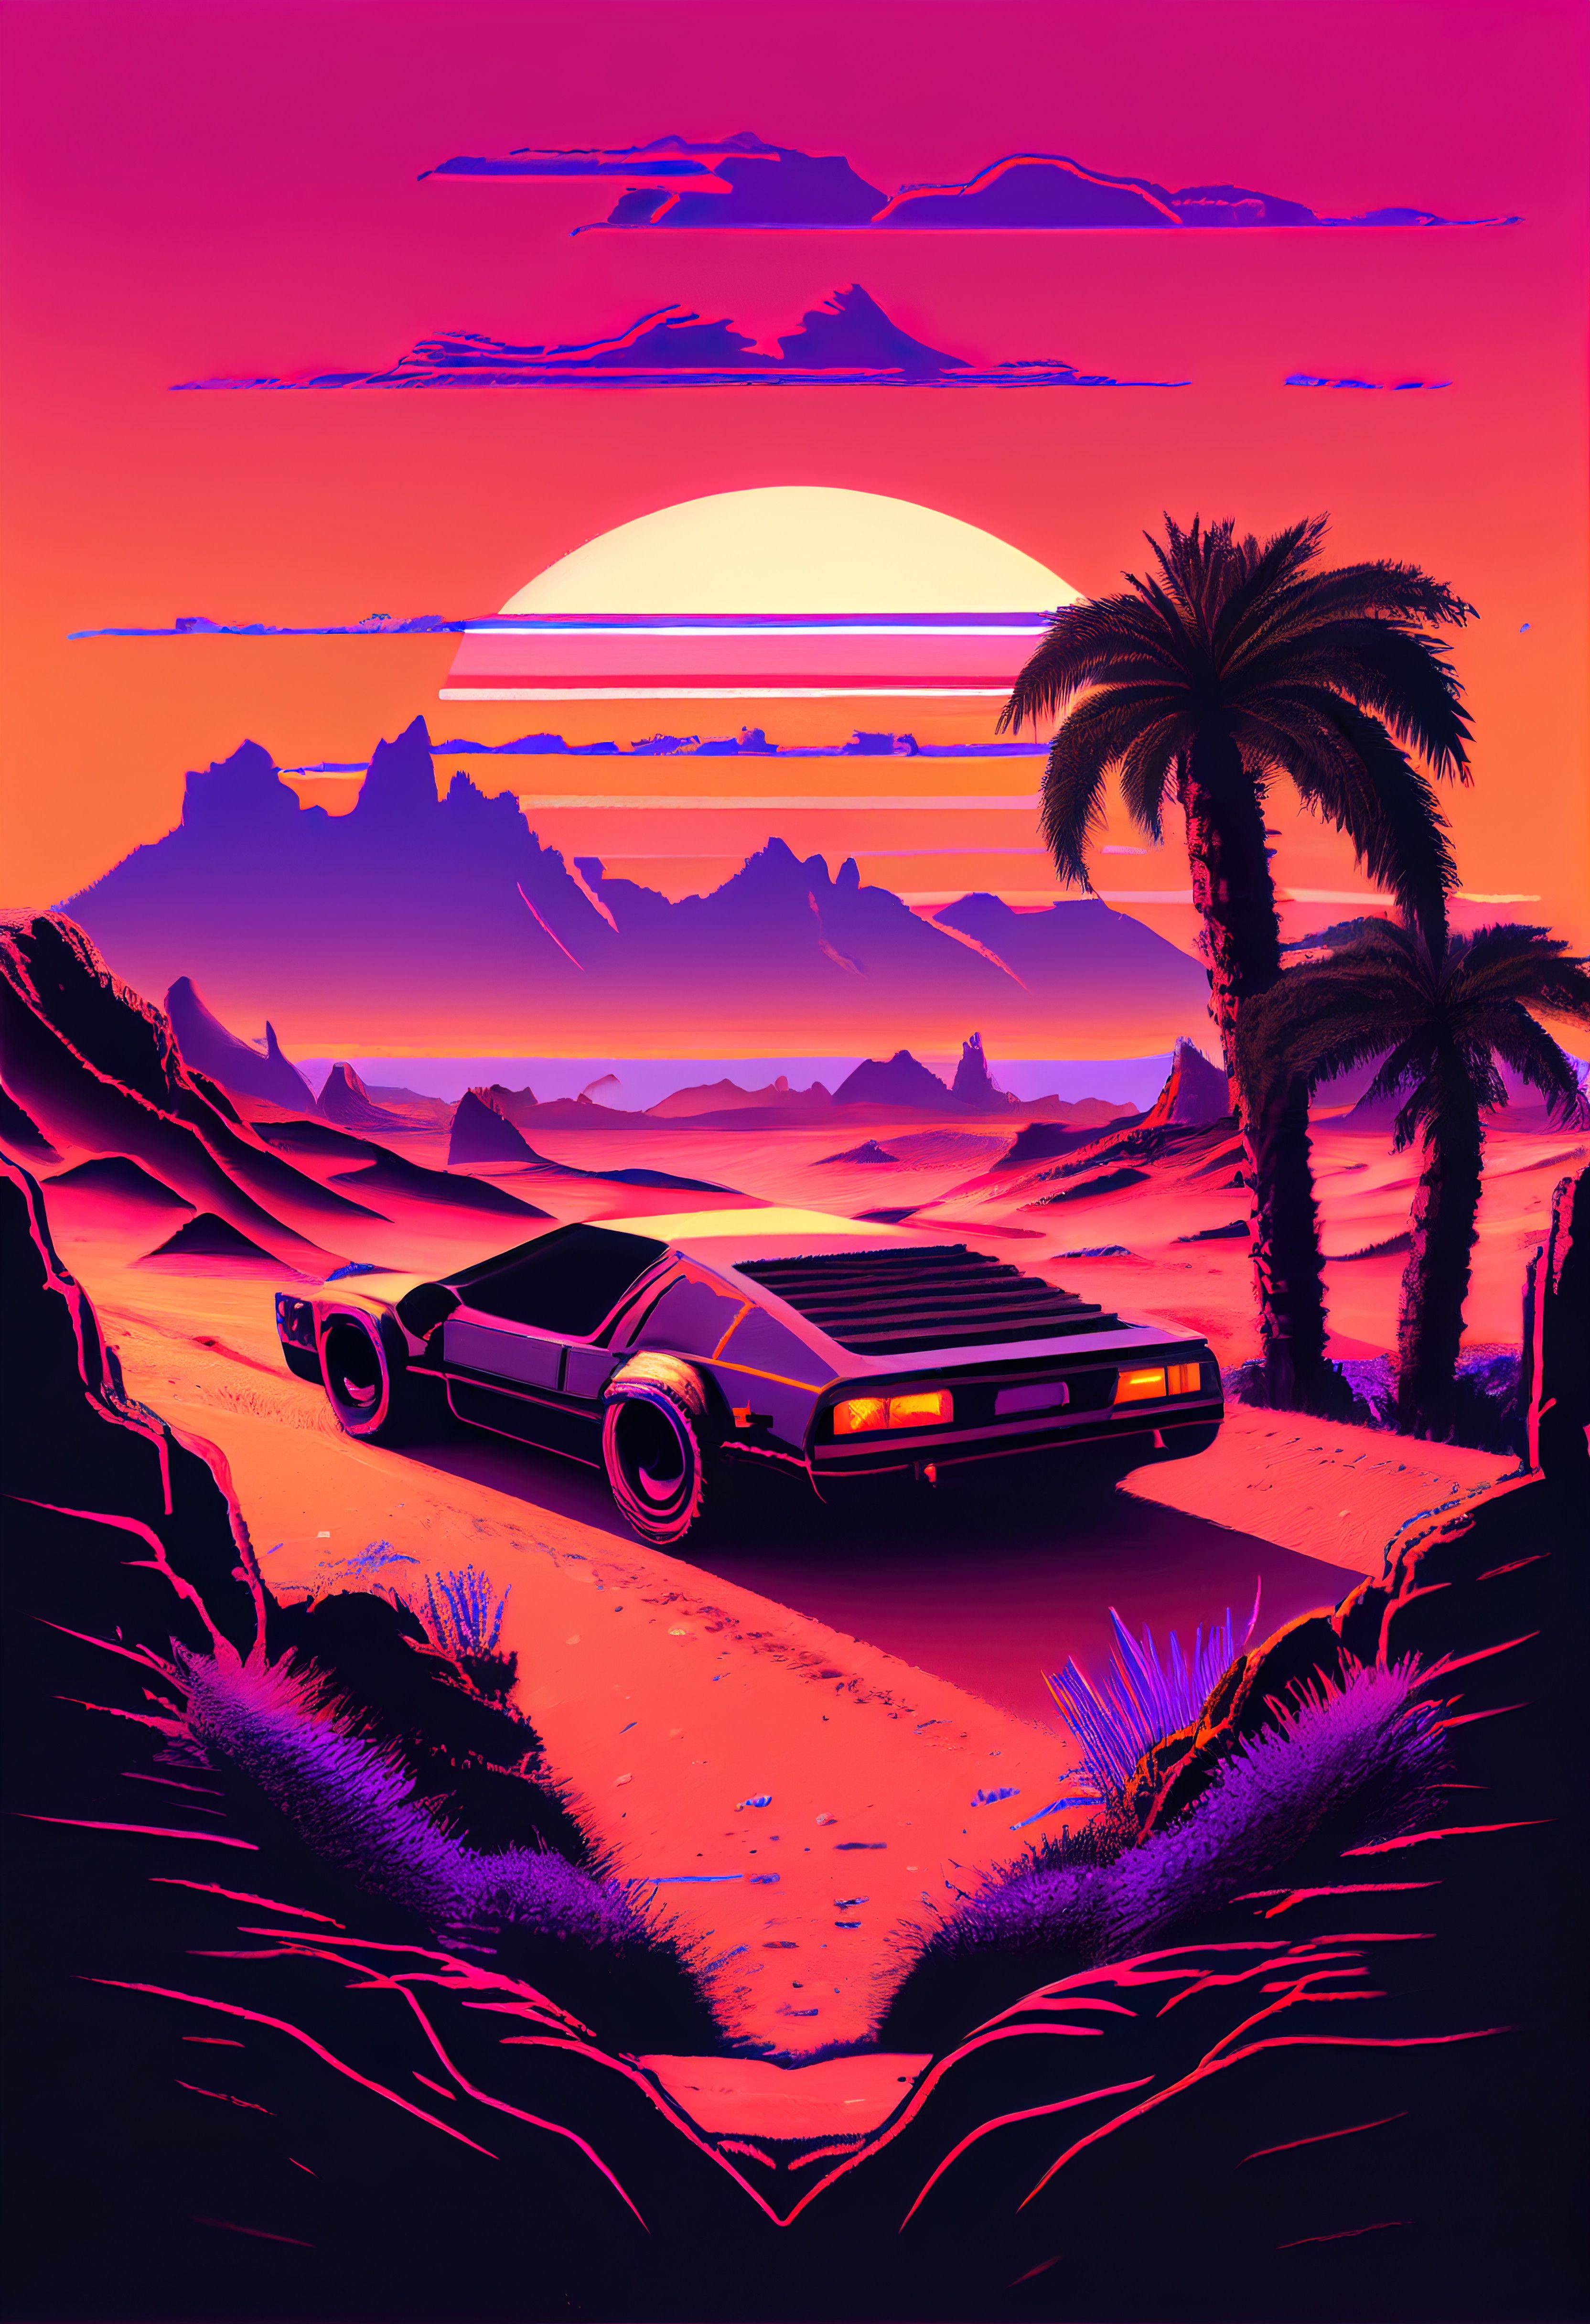 A car driving through the desert with palm trees in front of it - Synthwave